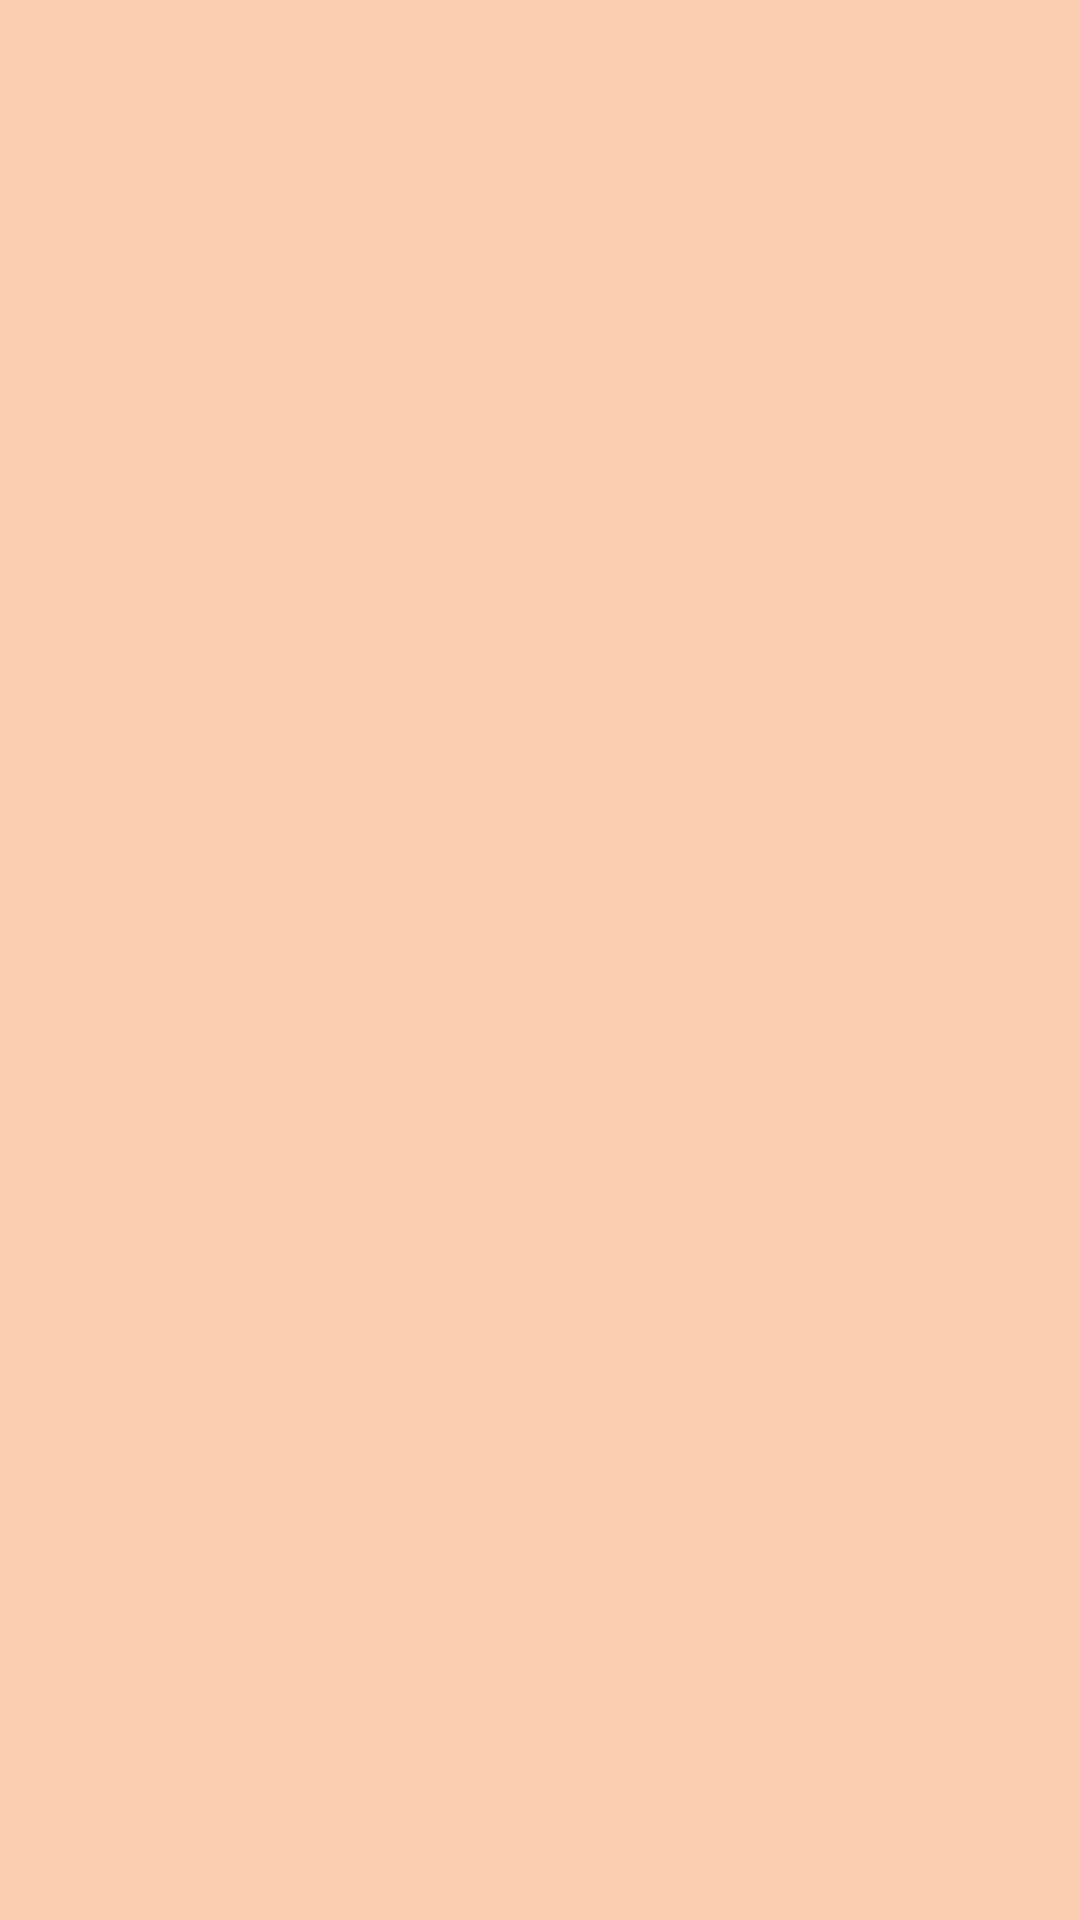 1080x1920 Apricot Solid Color Background